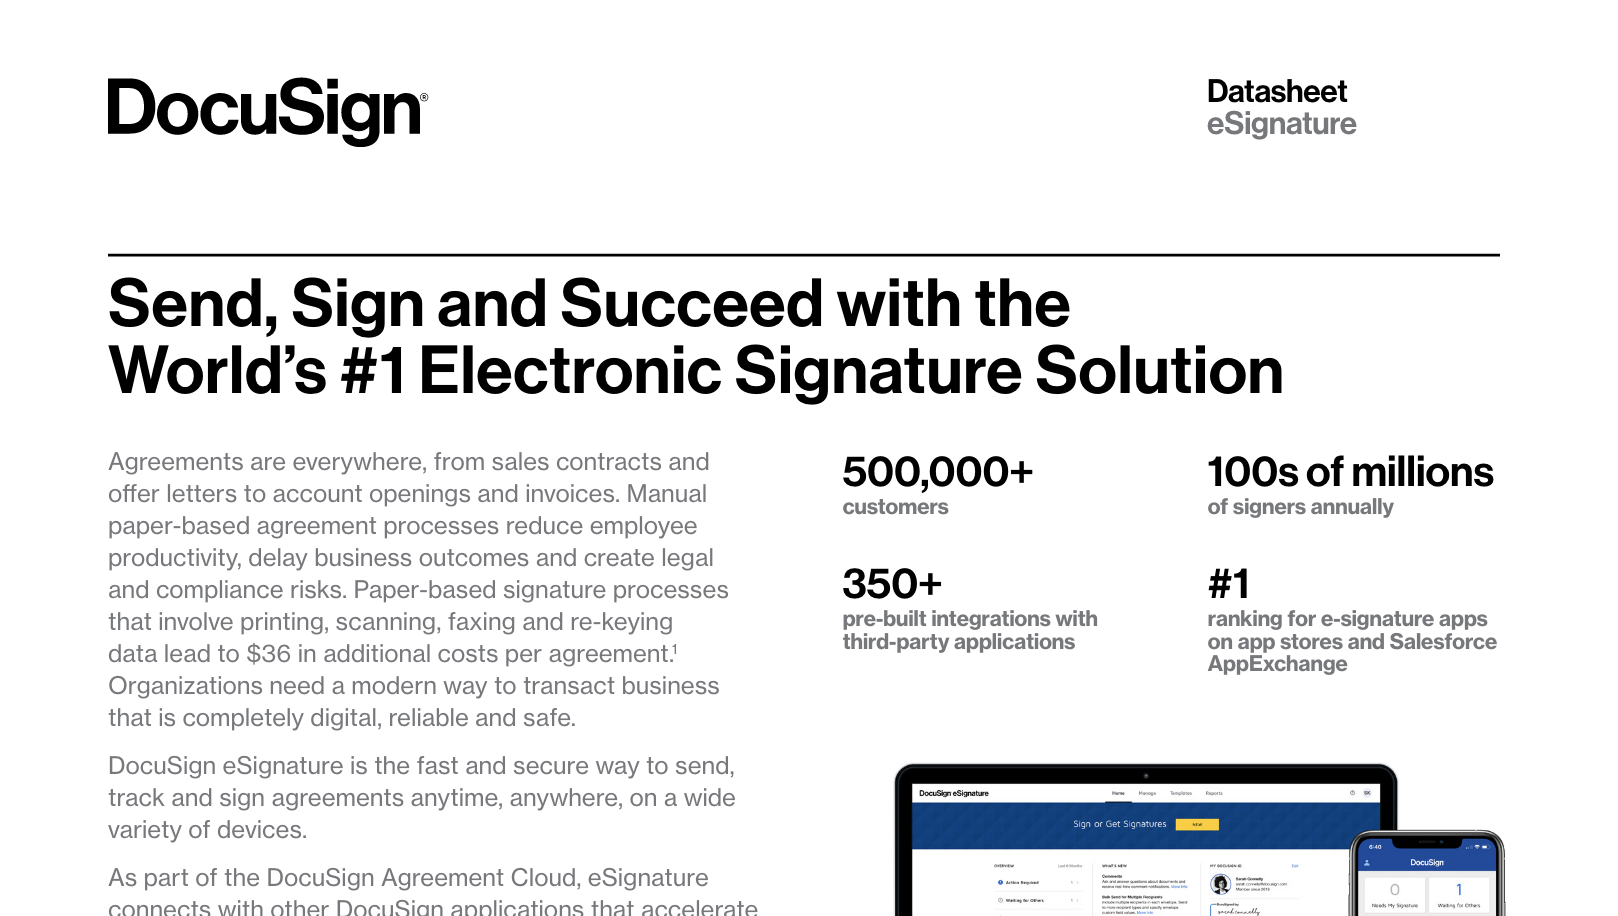 Send, Sign and Succeed with the World’s #1 Electronic Signature Solution